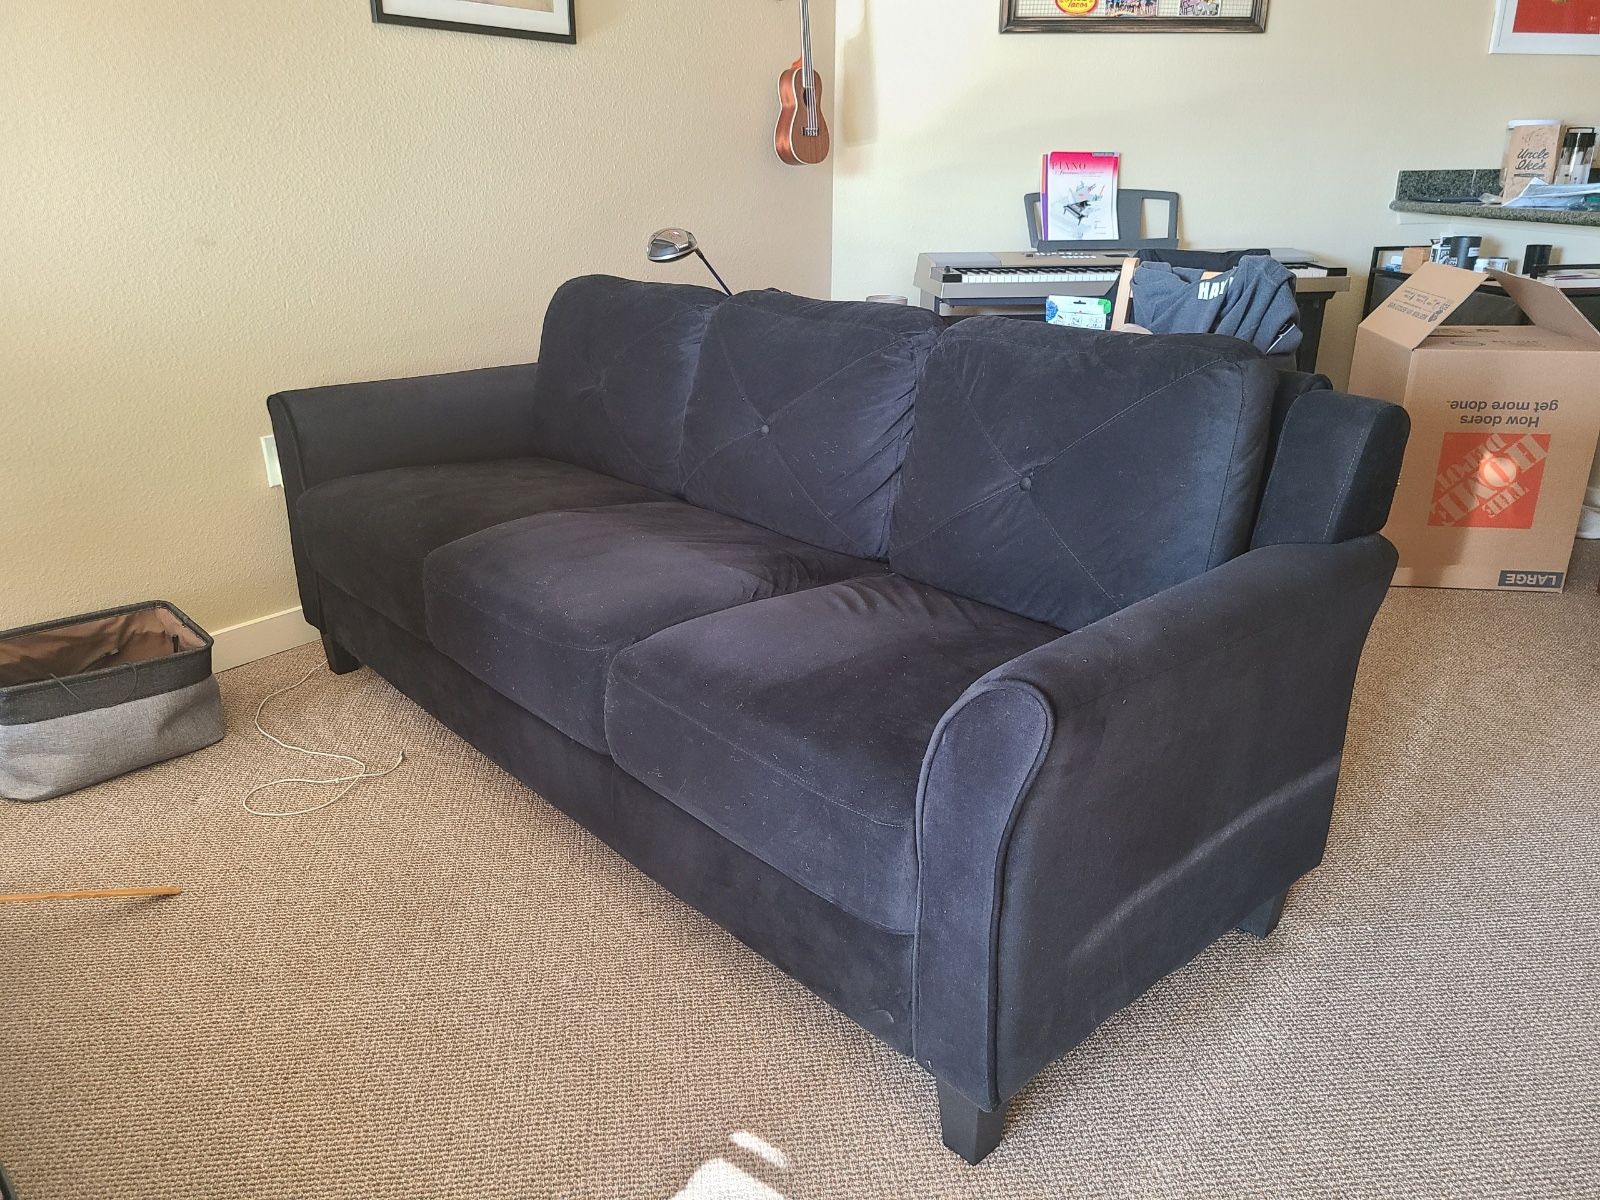 Wayfair black couch - only 1 month used - has to go for a move!!